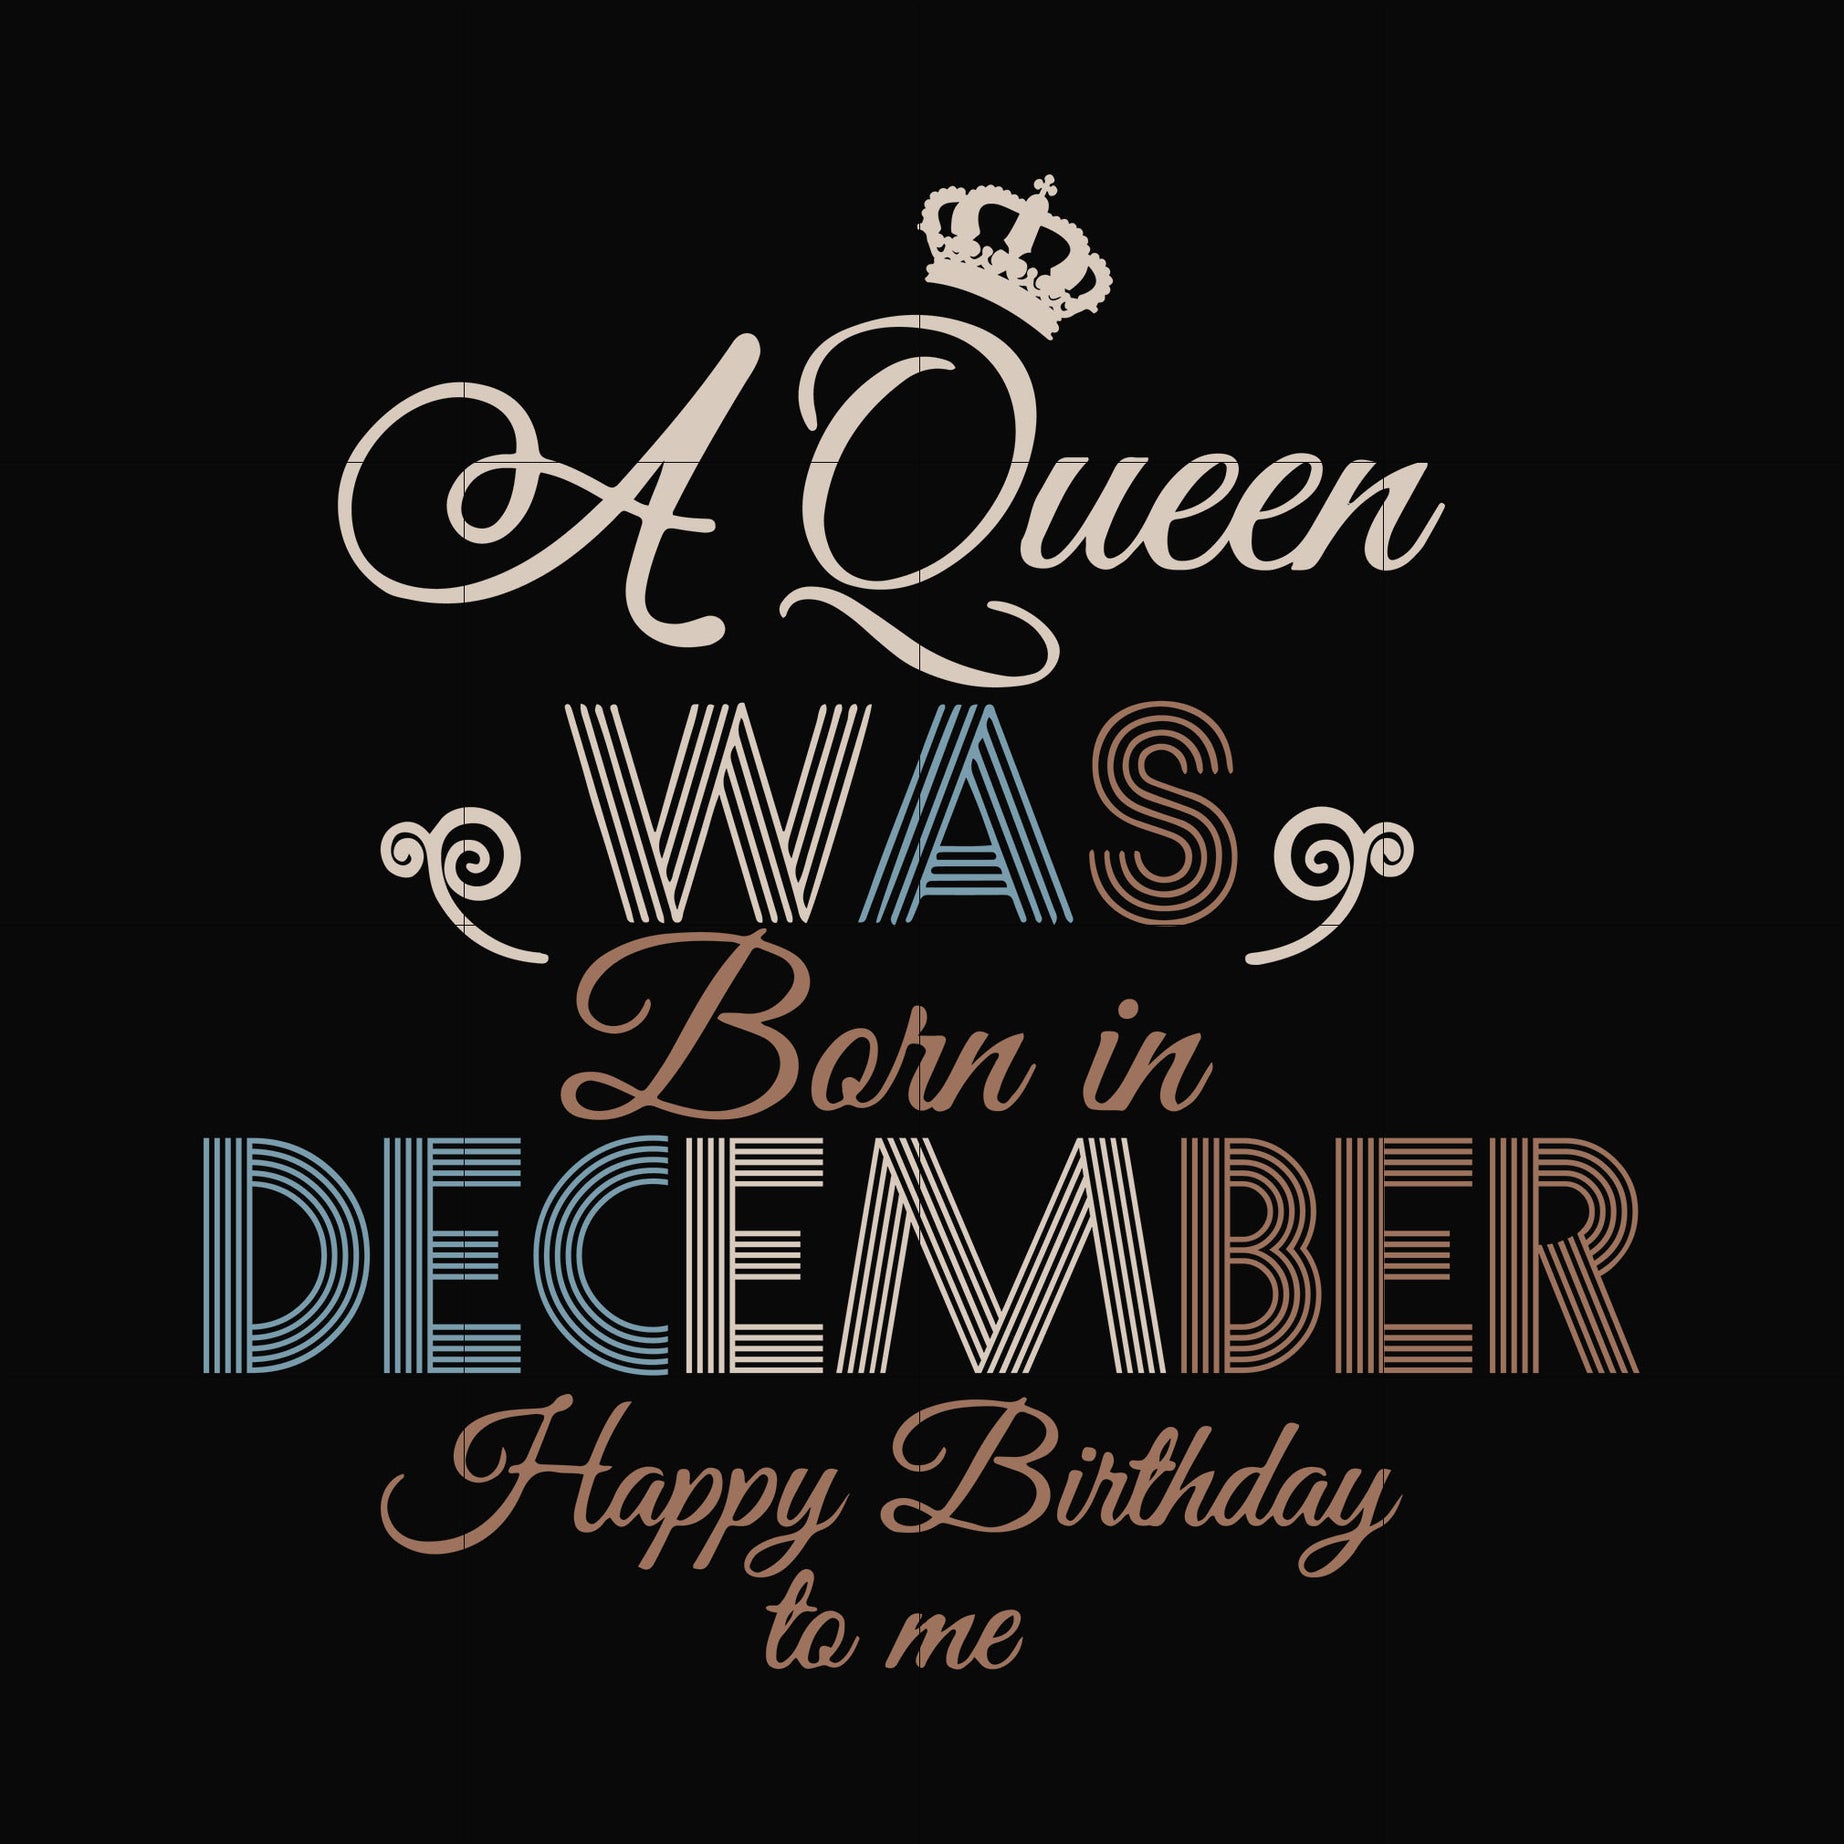 A Queen Was Born In December Happy Birthday To Me svg, png, dxf, eps digital file BD0083